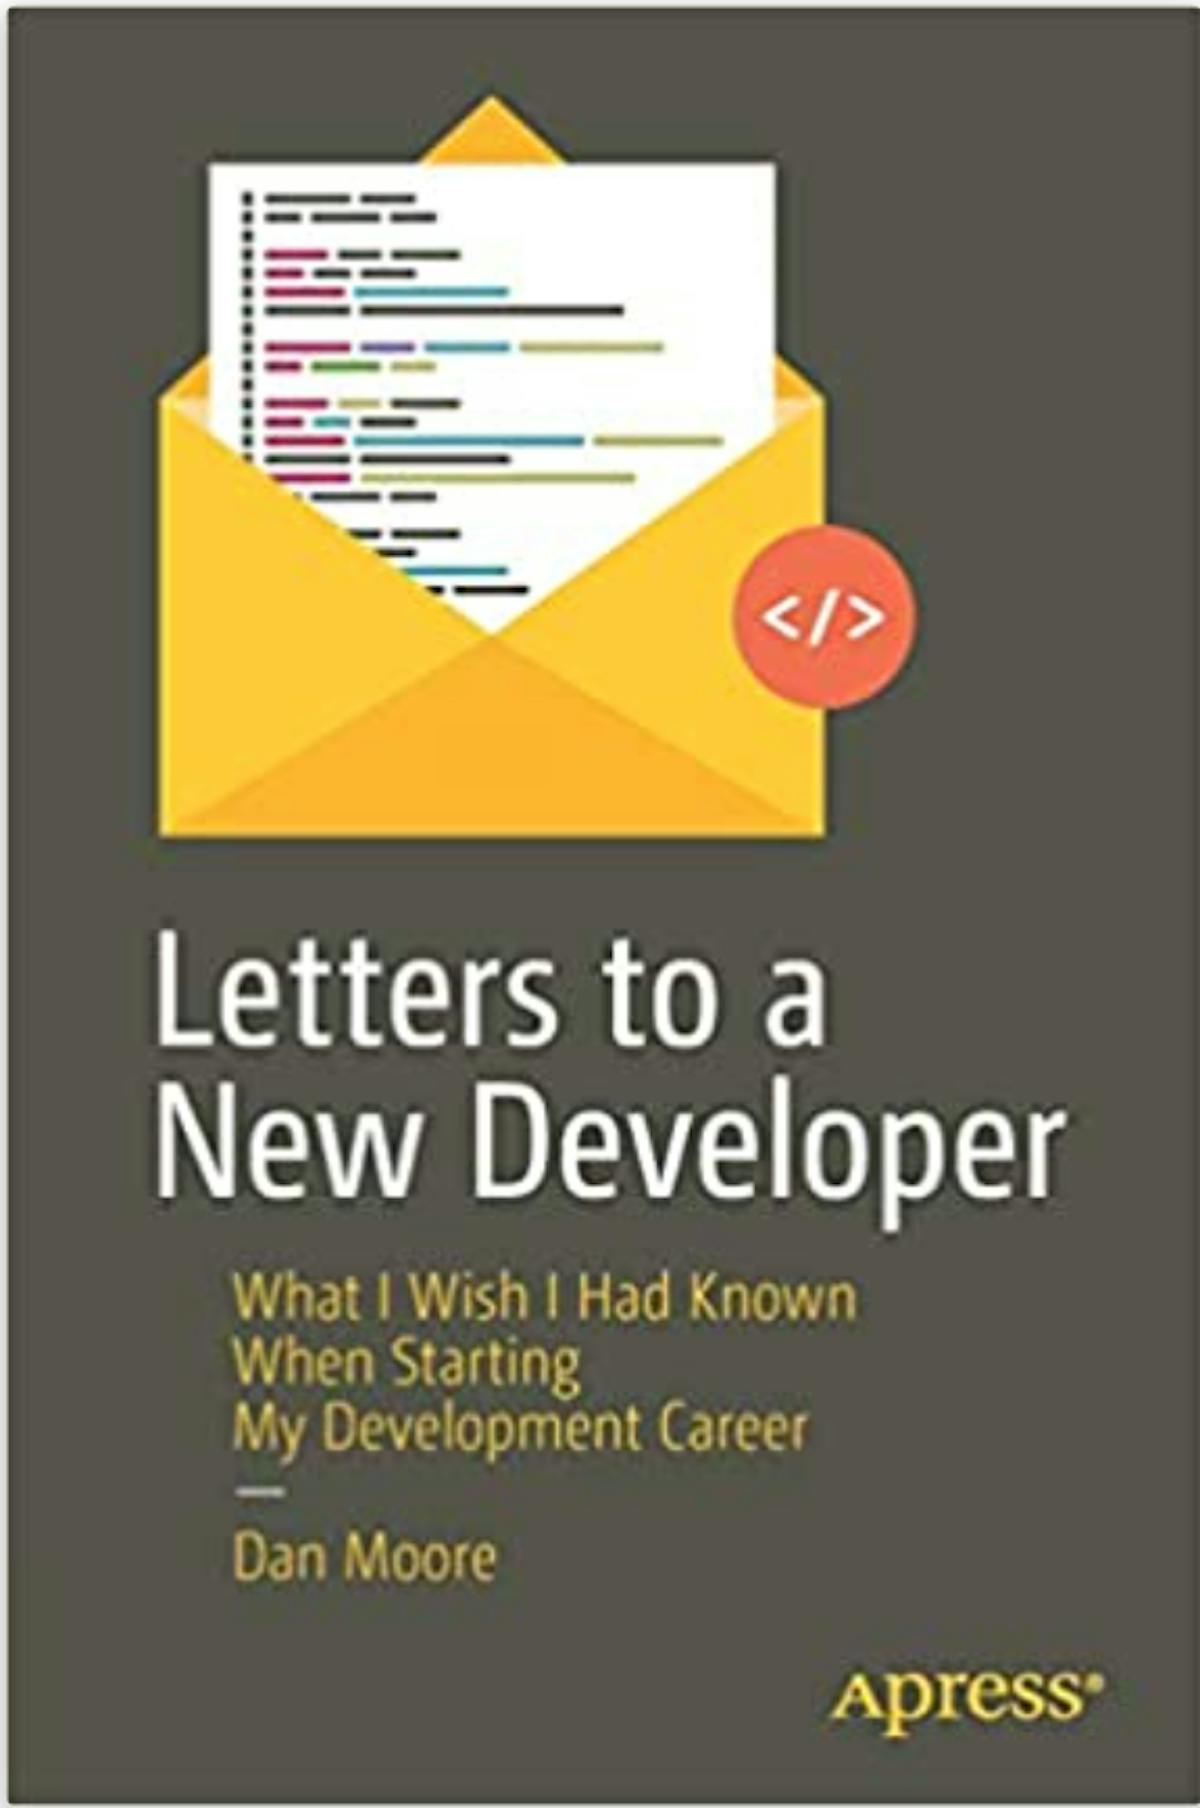 Letters to a New Developer book